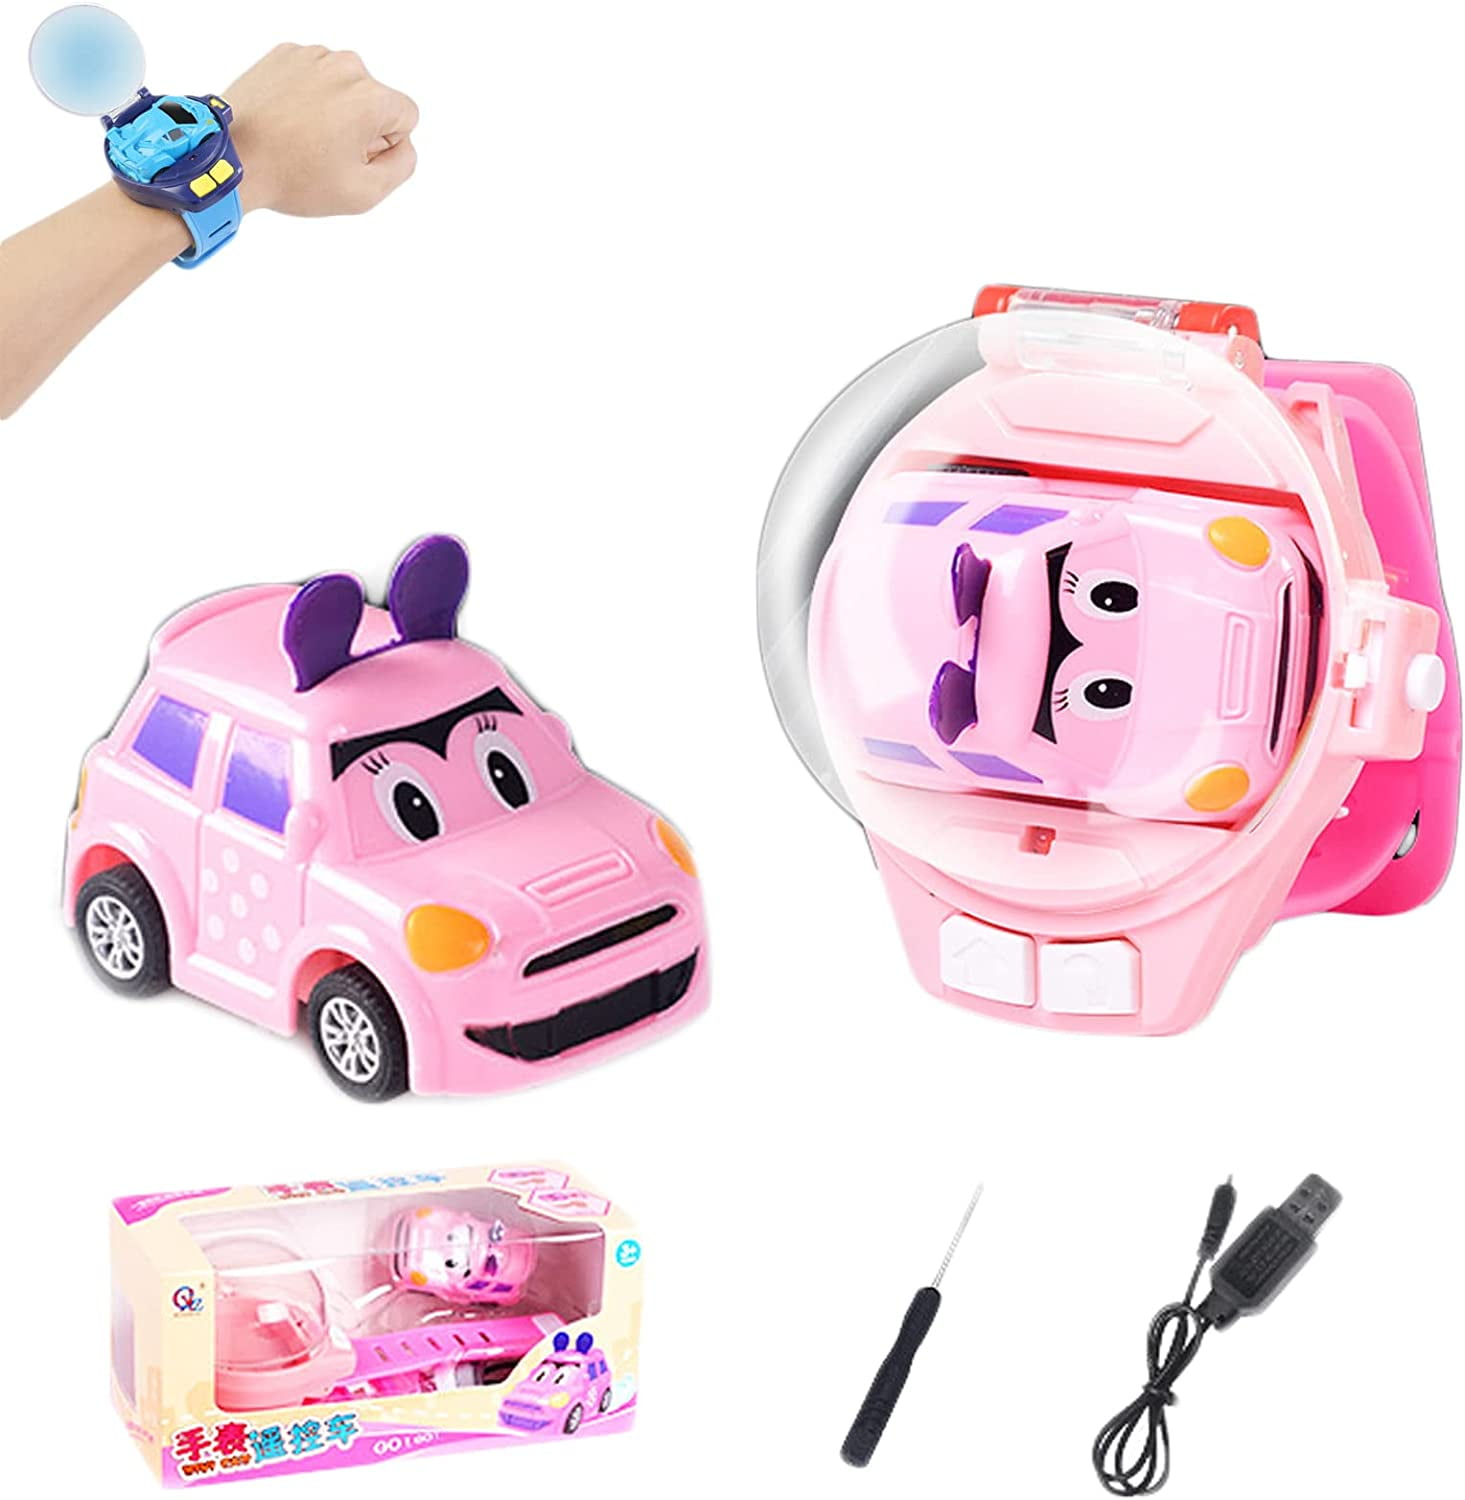 Mini Wrist Watch Remote Control Car Toys for Boys Grils, 2.4 GHz USB  Charging RC Small Car with LED Taillight, Cute Racing Car Gifts for Kids  Ages 4+